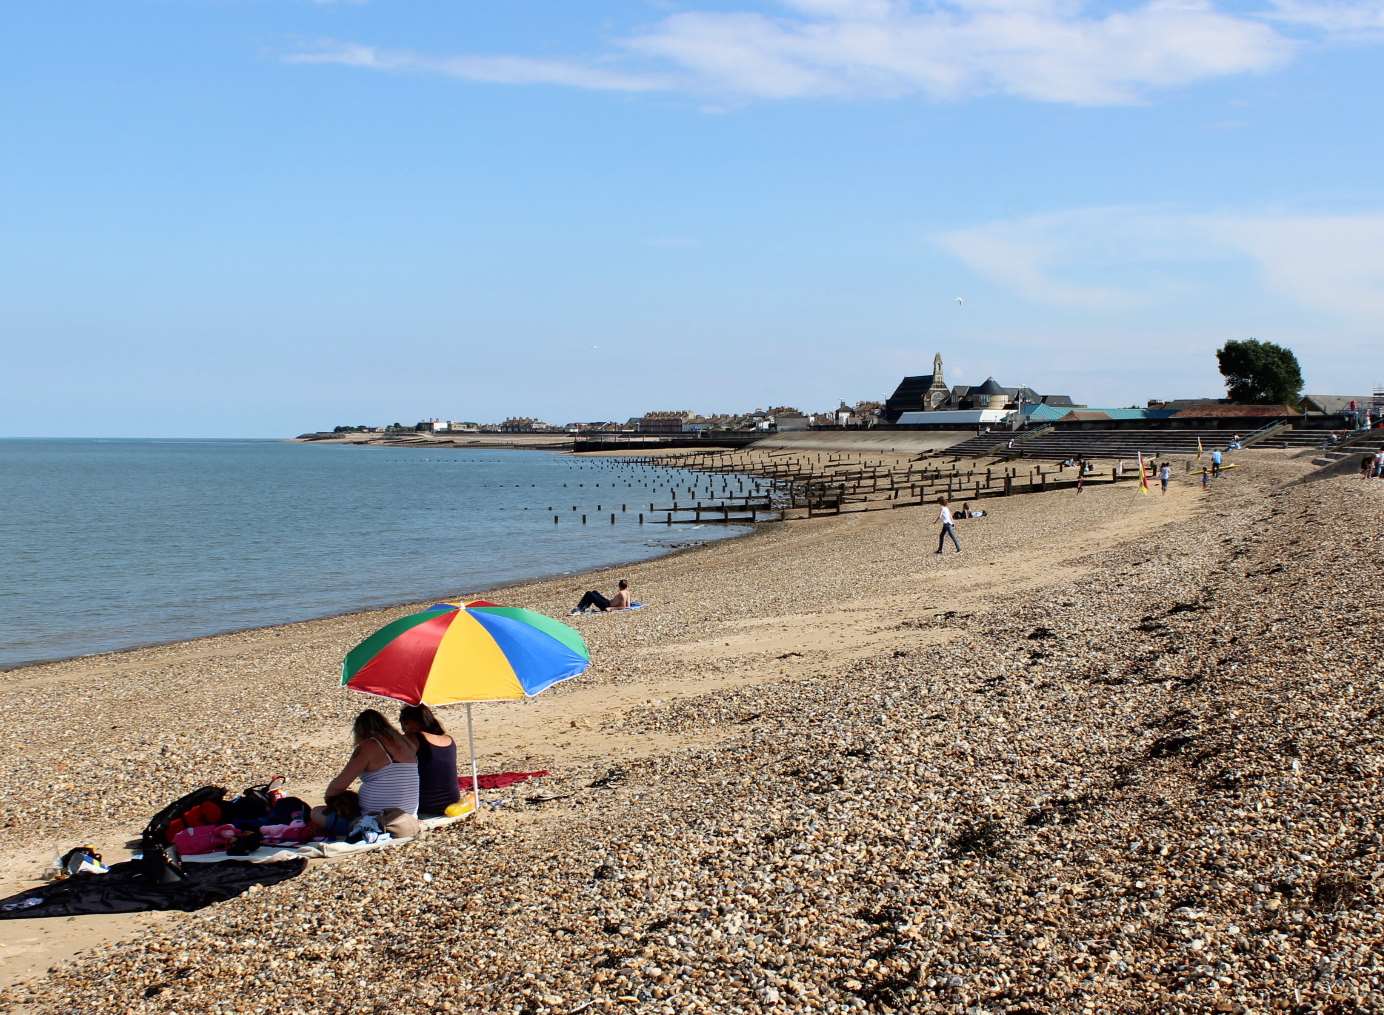 Sheerness: Award-winning beach with strips of sand and steps to promenade but no lighting at night, no public lavatories or showers.